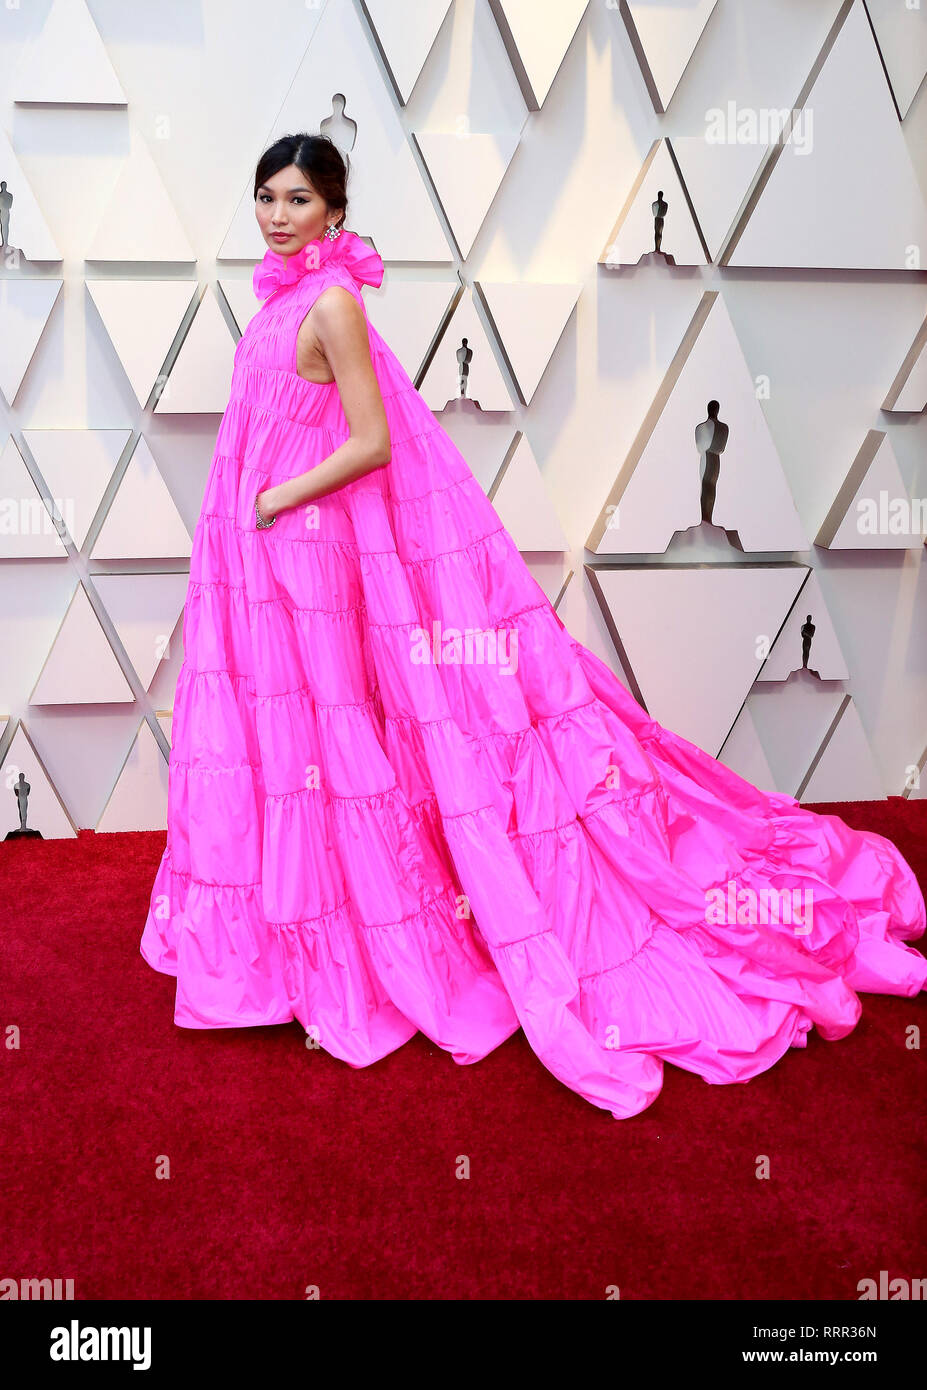 Hollywood, California, USA. 24th Feb, 2019. 24 February 2019 - Hollywood, California - Gemma Chan. 91st Annual Academy Awards presented by the Academy of Motion Picture Arts and Sciences held at Hollywood & Highland Center. Photo Credit: AdMedia Credit: AdMedia/ZUMA Wire/Alamy Live News Stock Photo